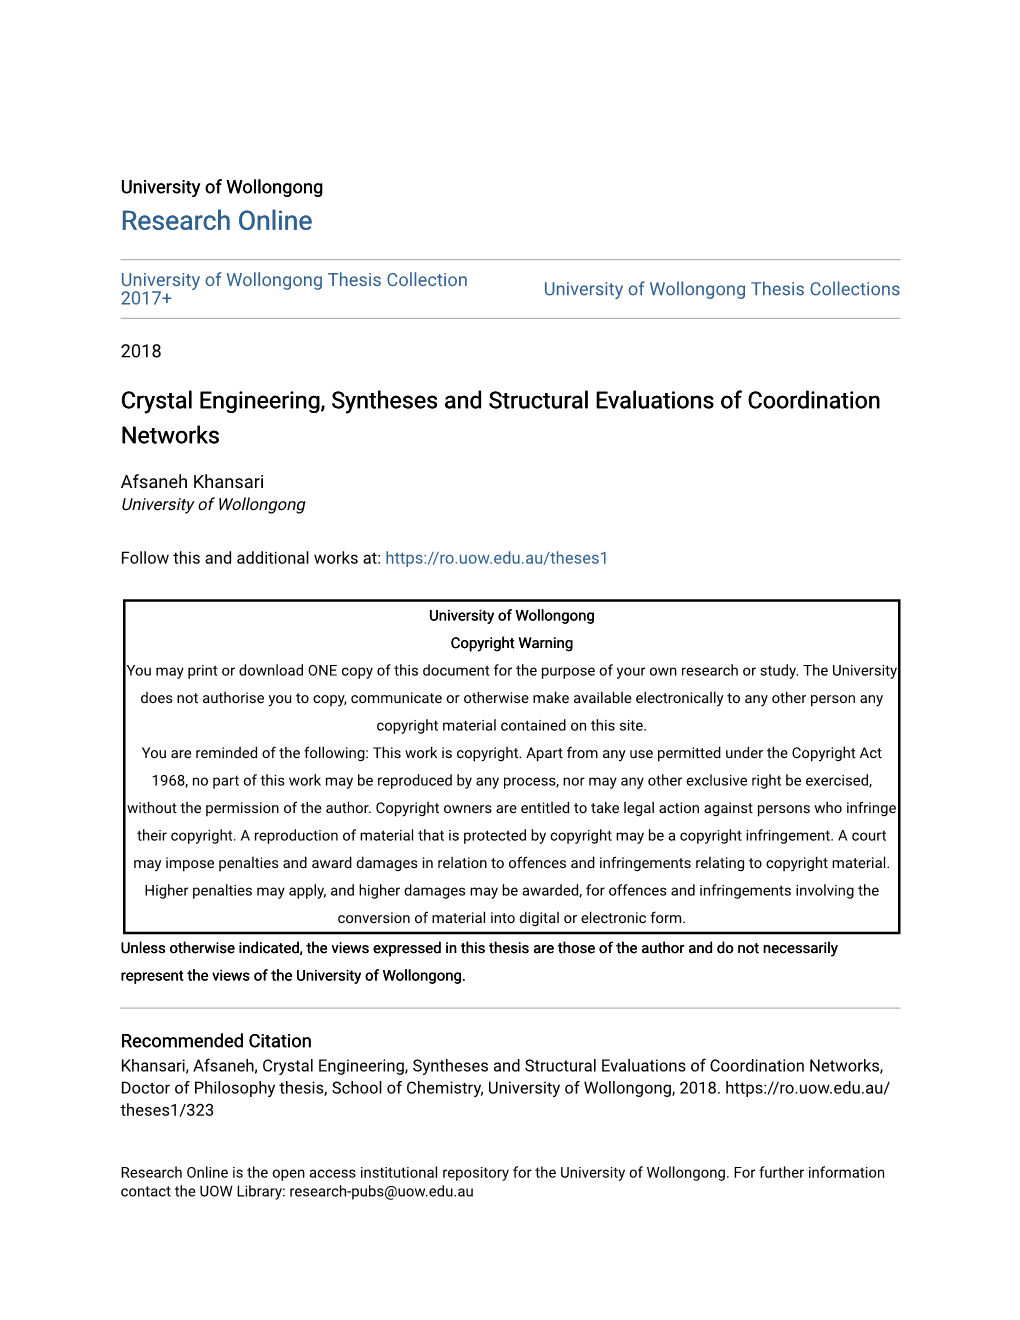 Crystal Engineering, Syntheses and Structural Evaluations of Coordination Networks